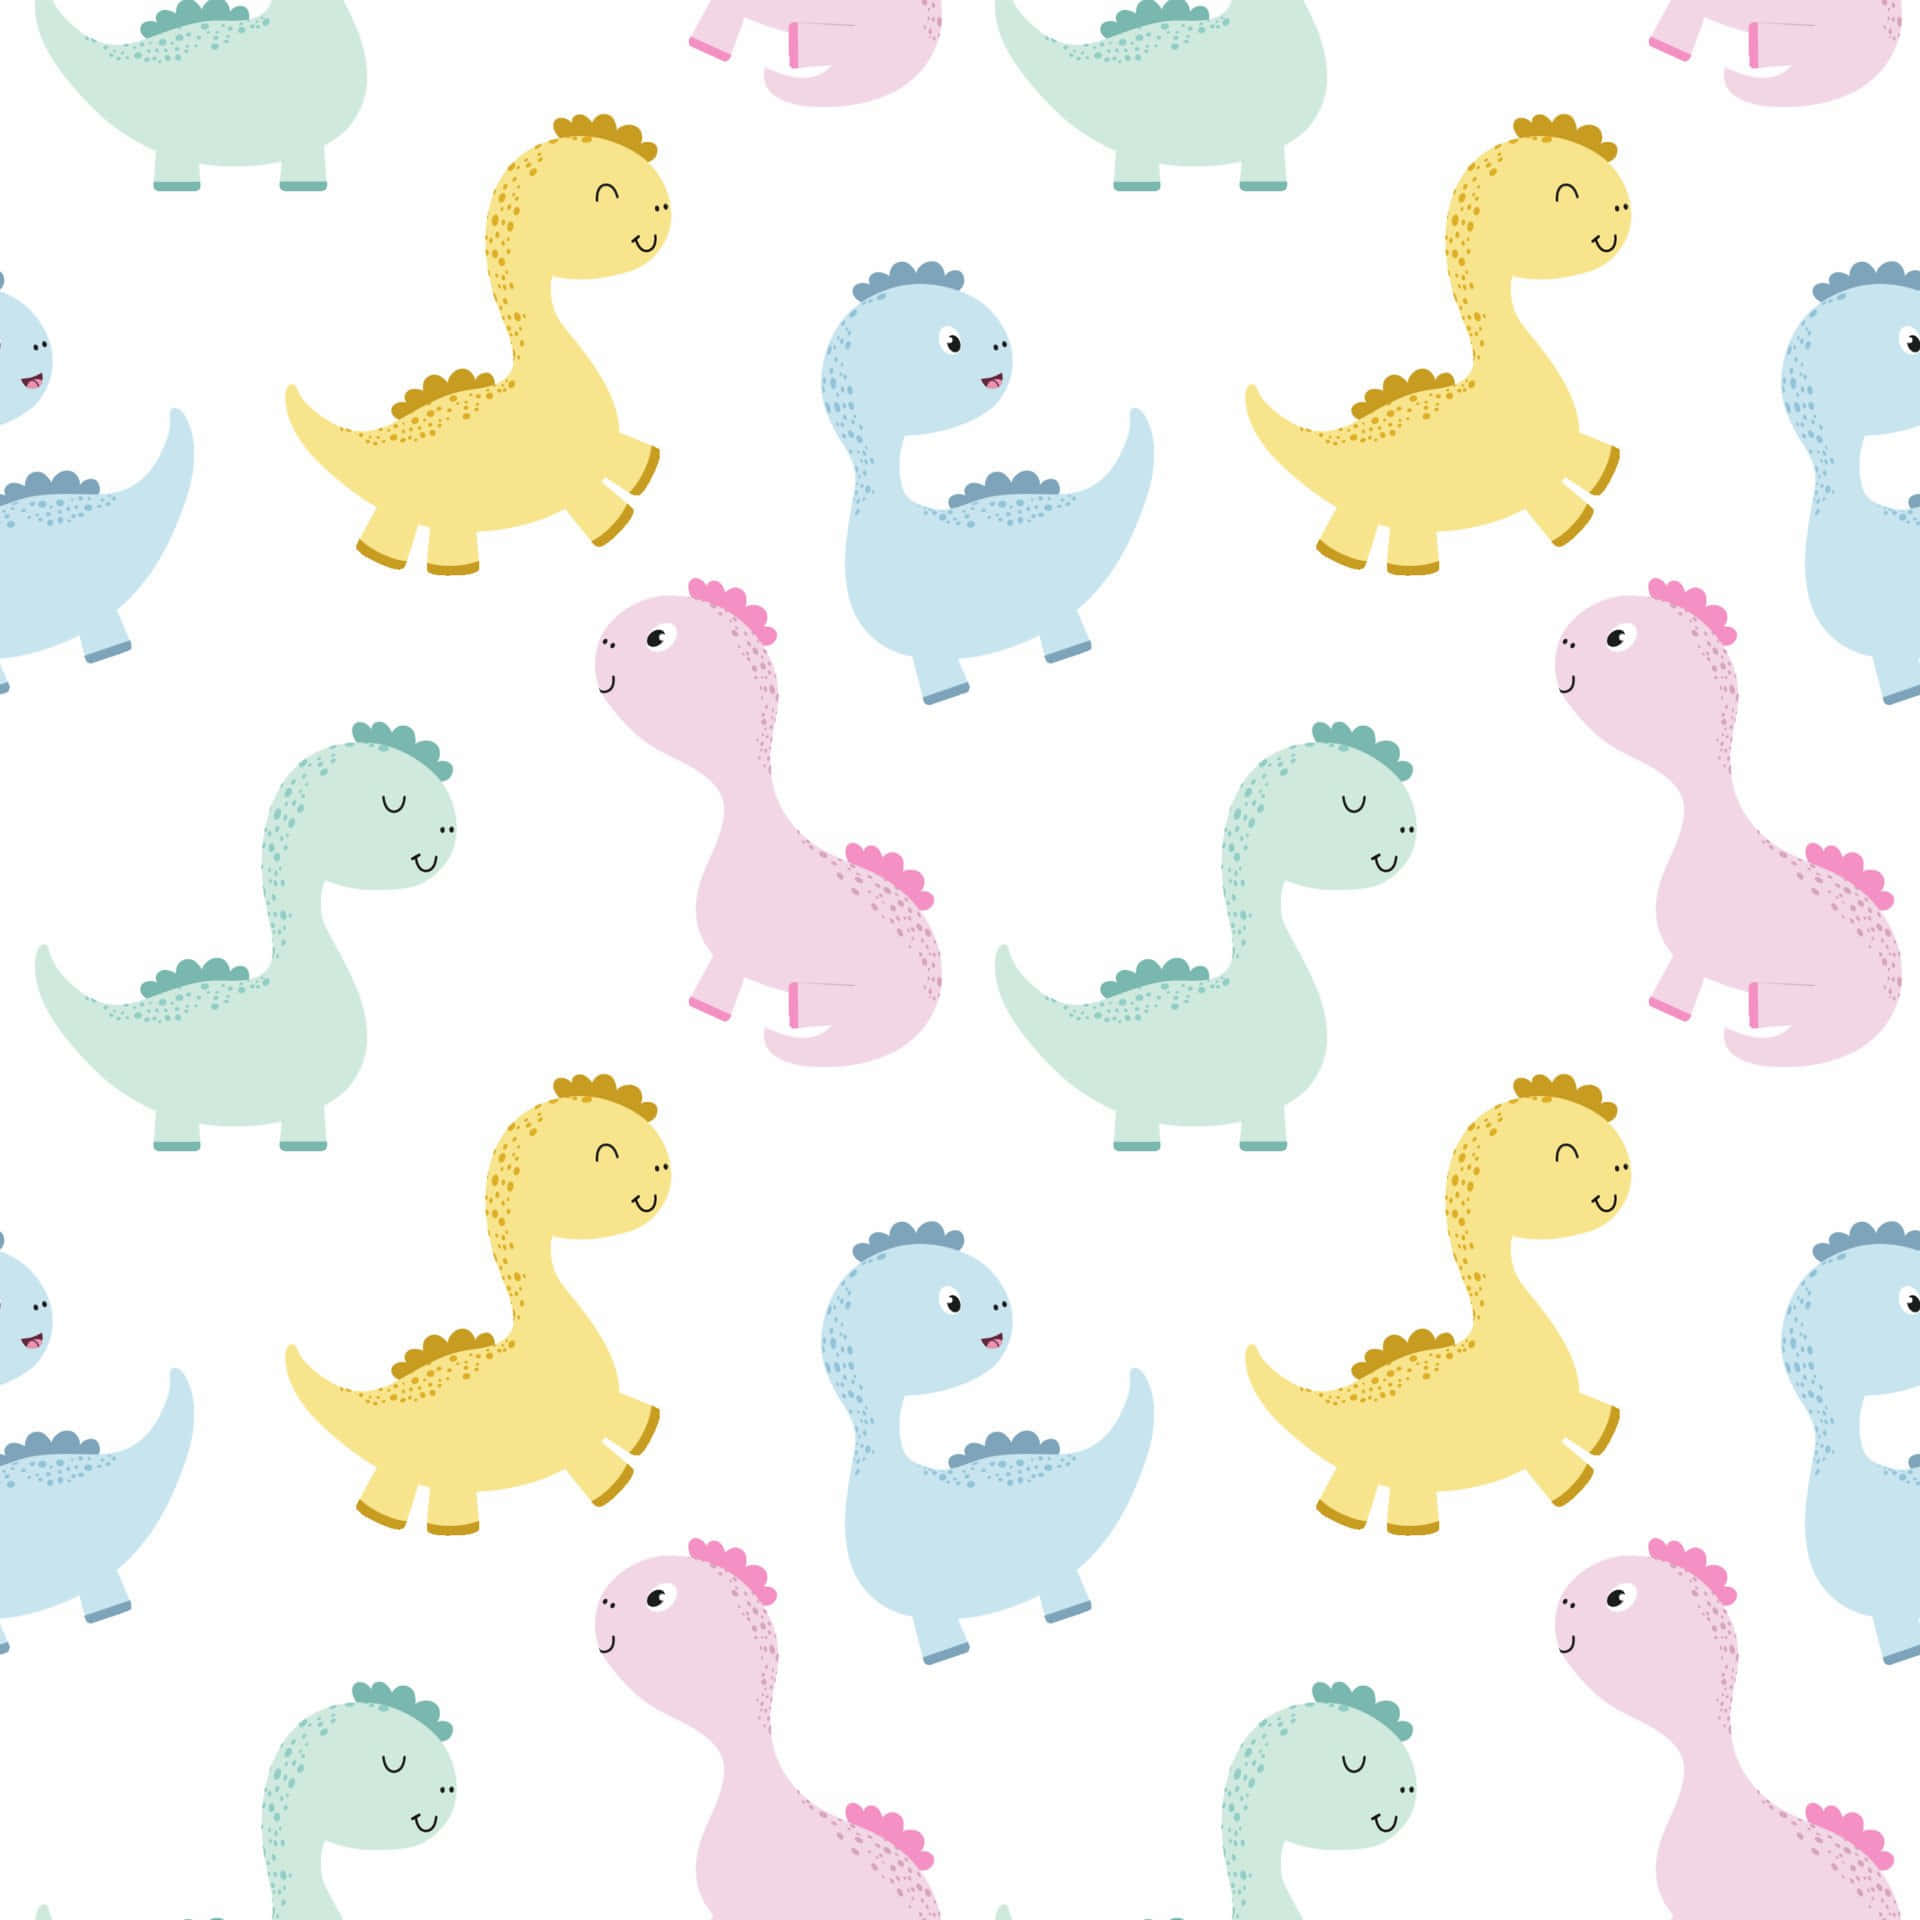 Adorable Cartoon Dinosaur on a Colorful Forest Background